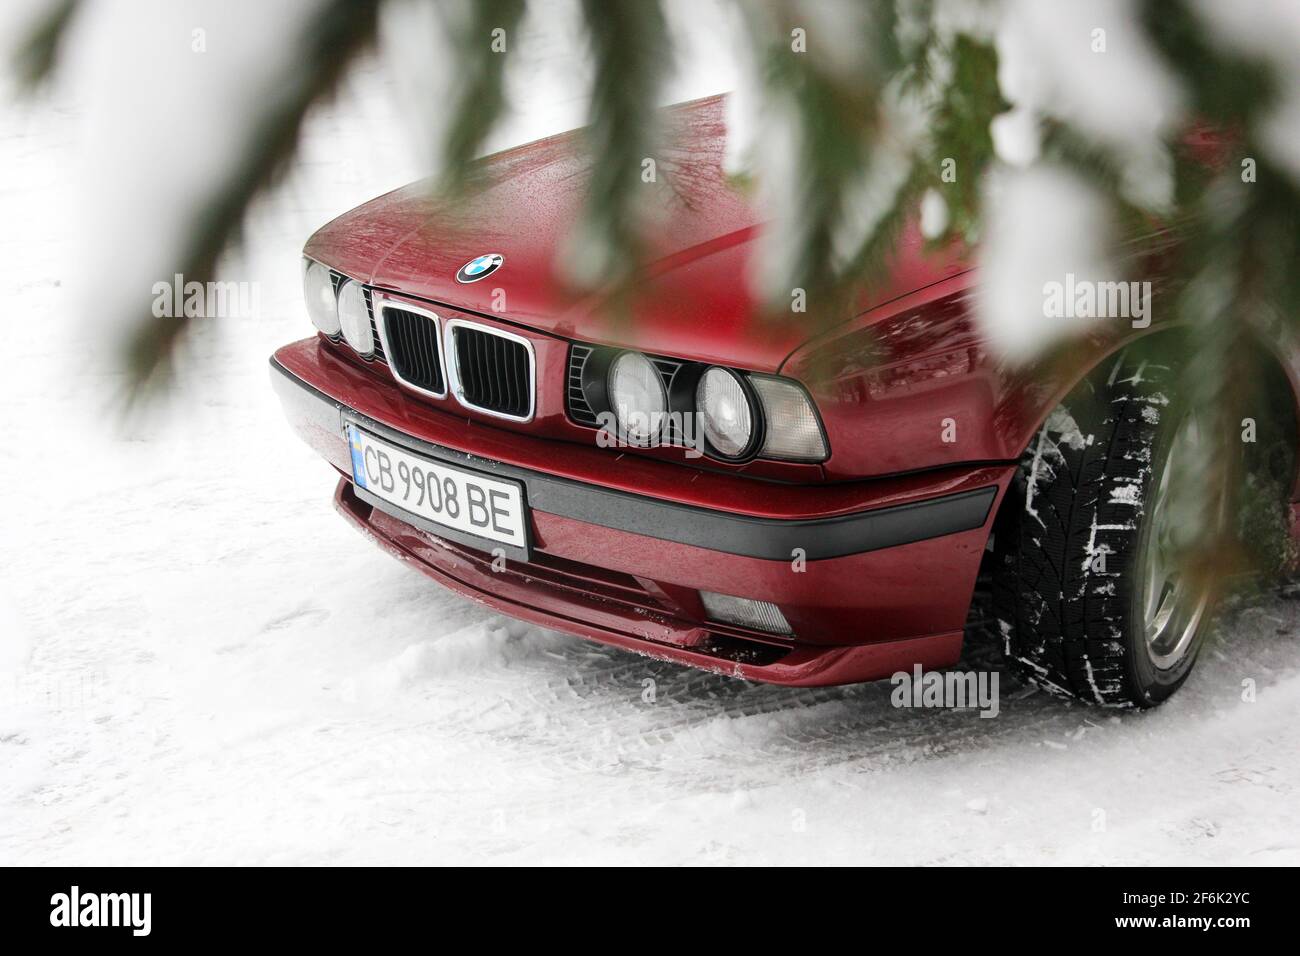 Chernigov, Ukraine - December 21, 2017: BMW 520 (E34) in the winter forest. Red BMW in a beautiful forest. Nature. Snow Stock Photo